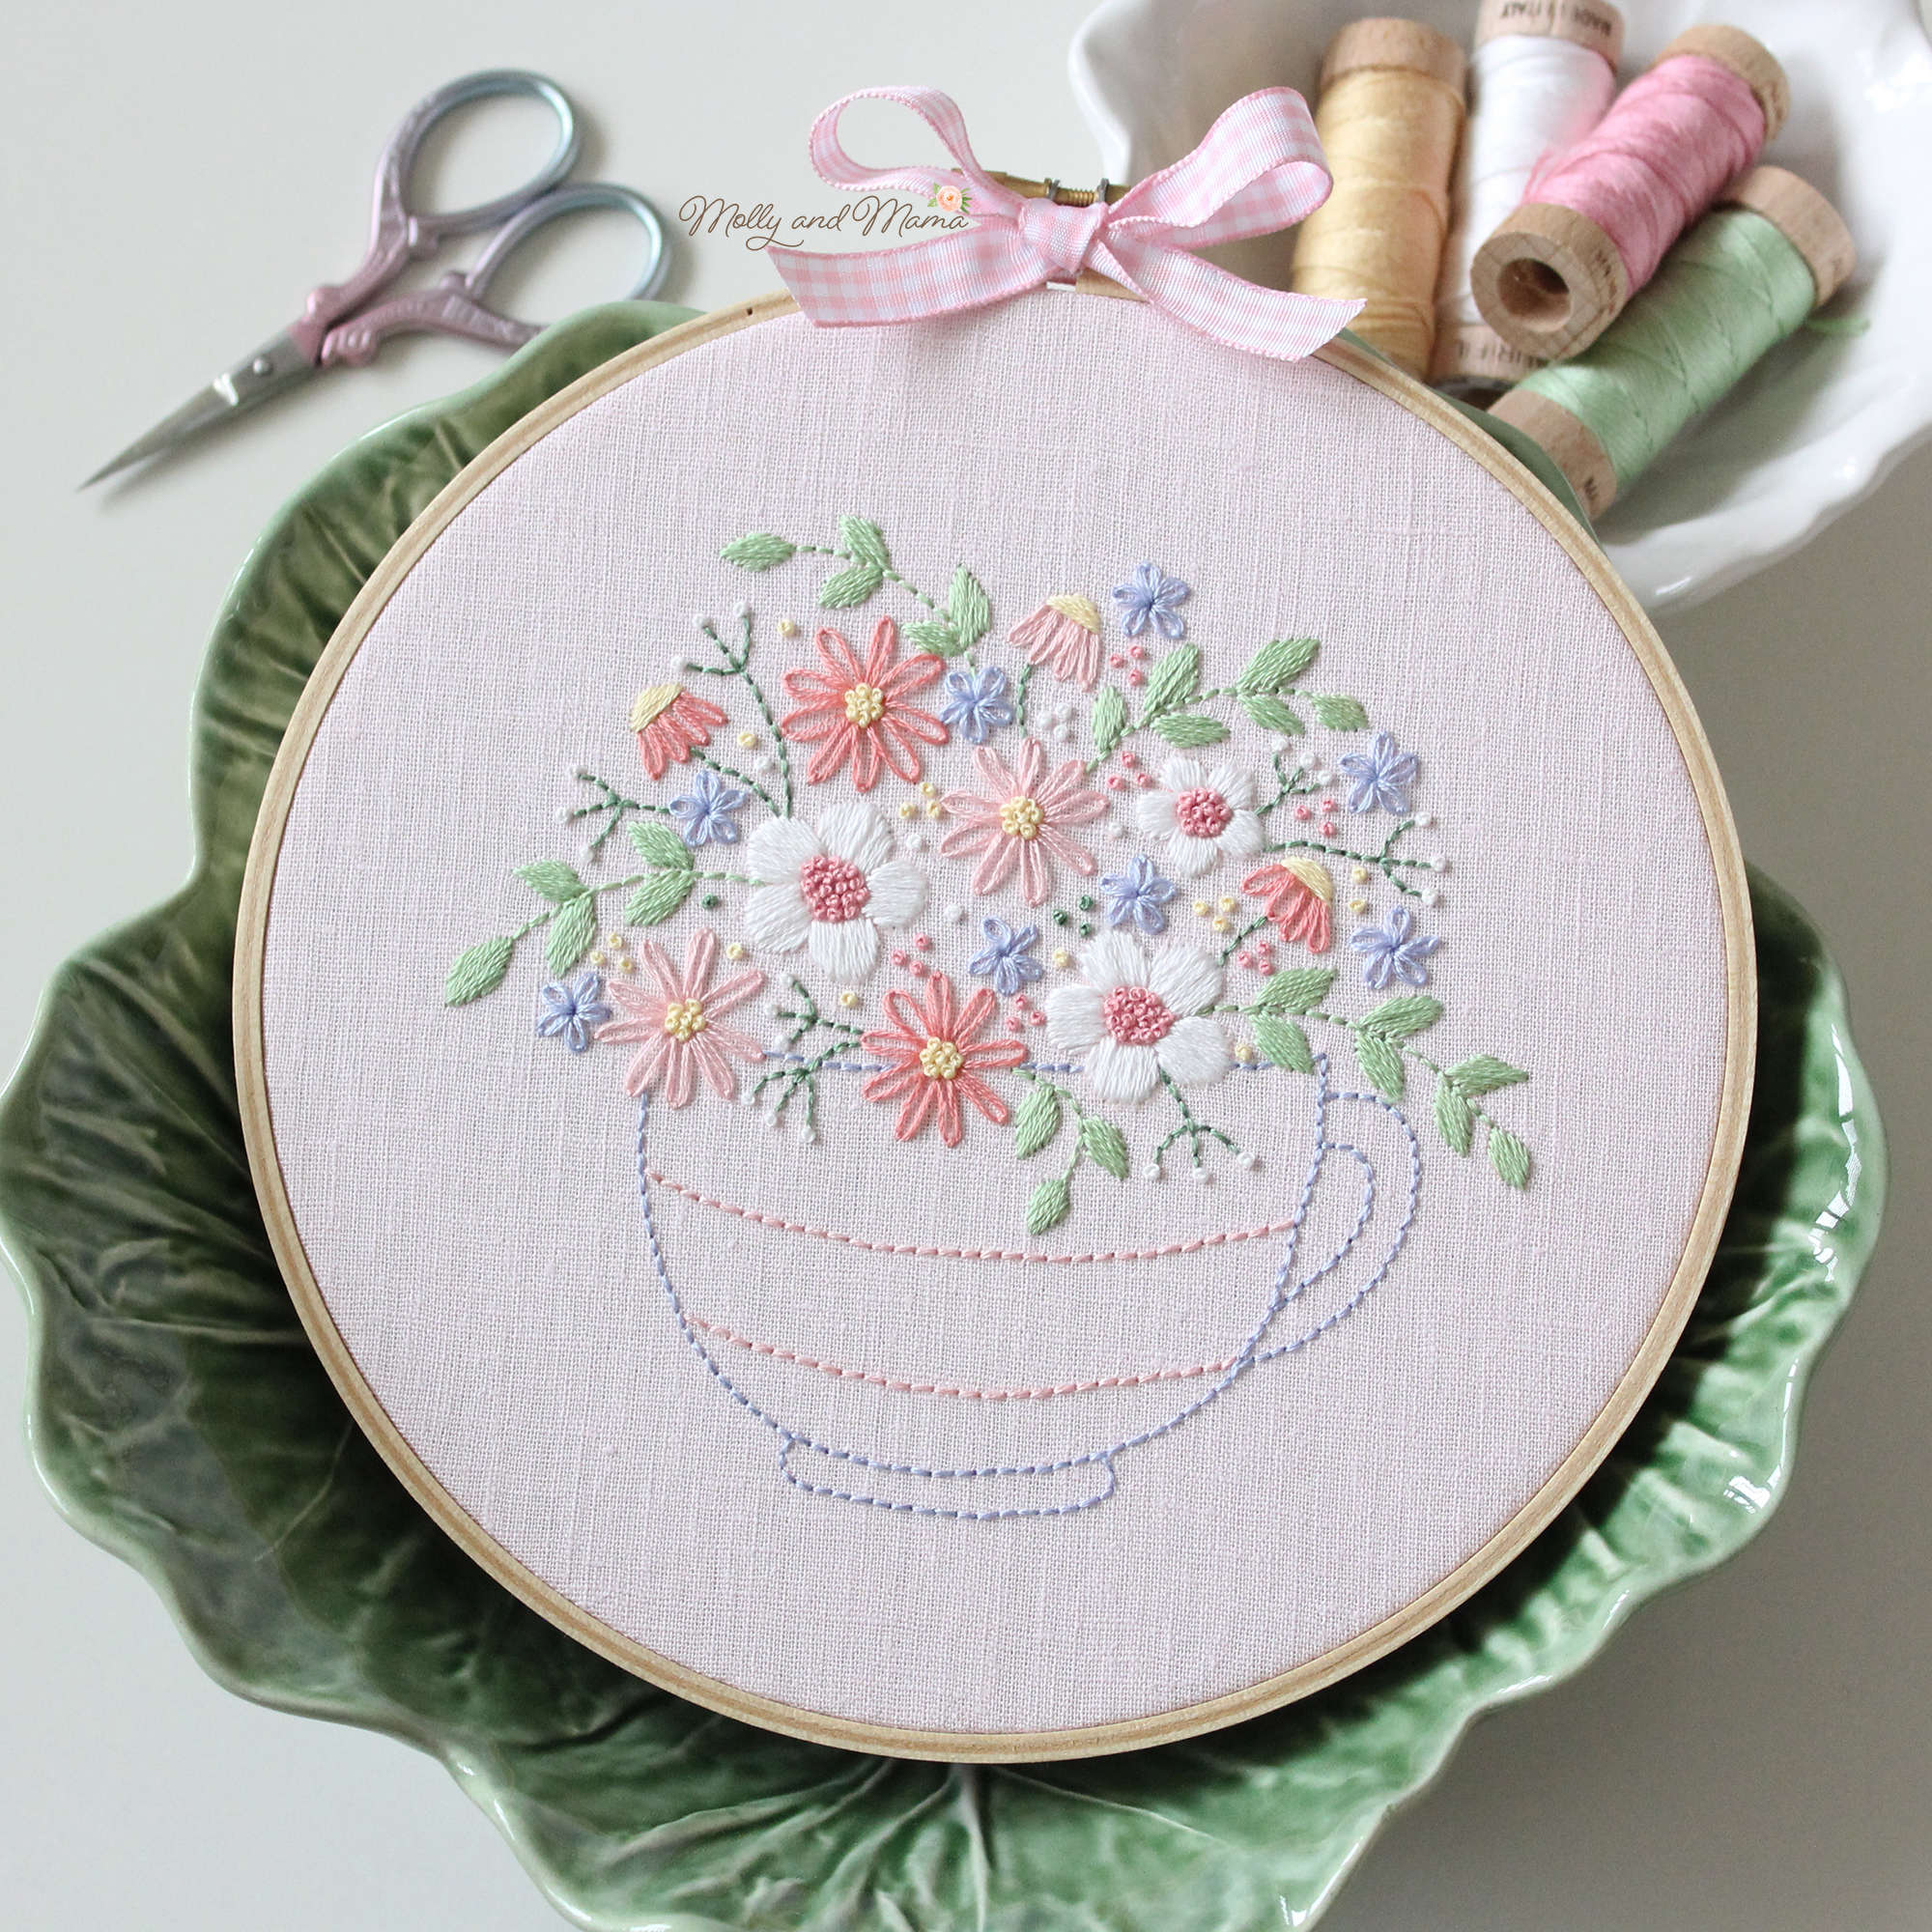 Embroidery helpers - tools that make your life easier